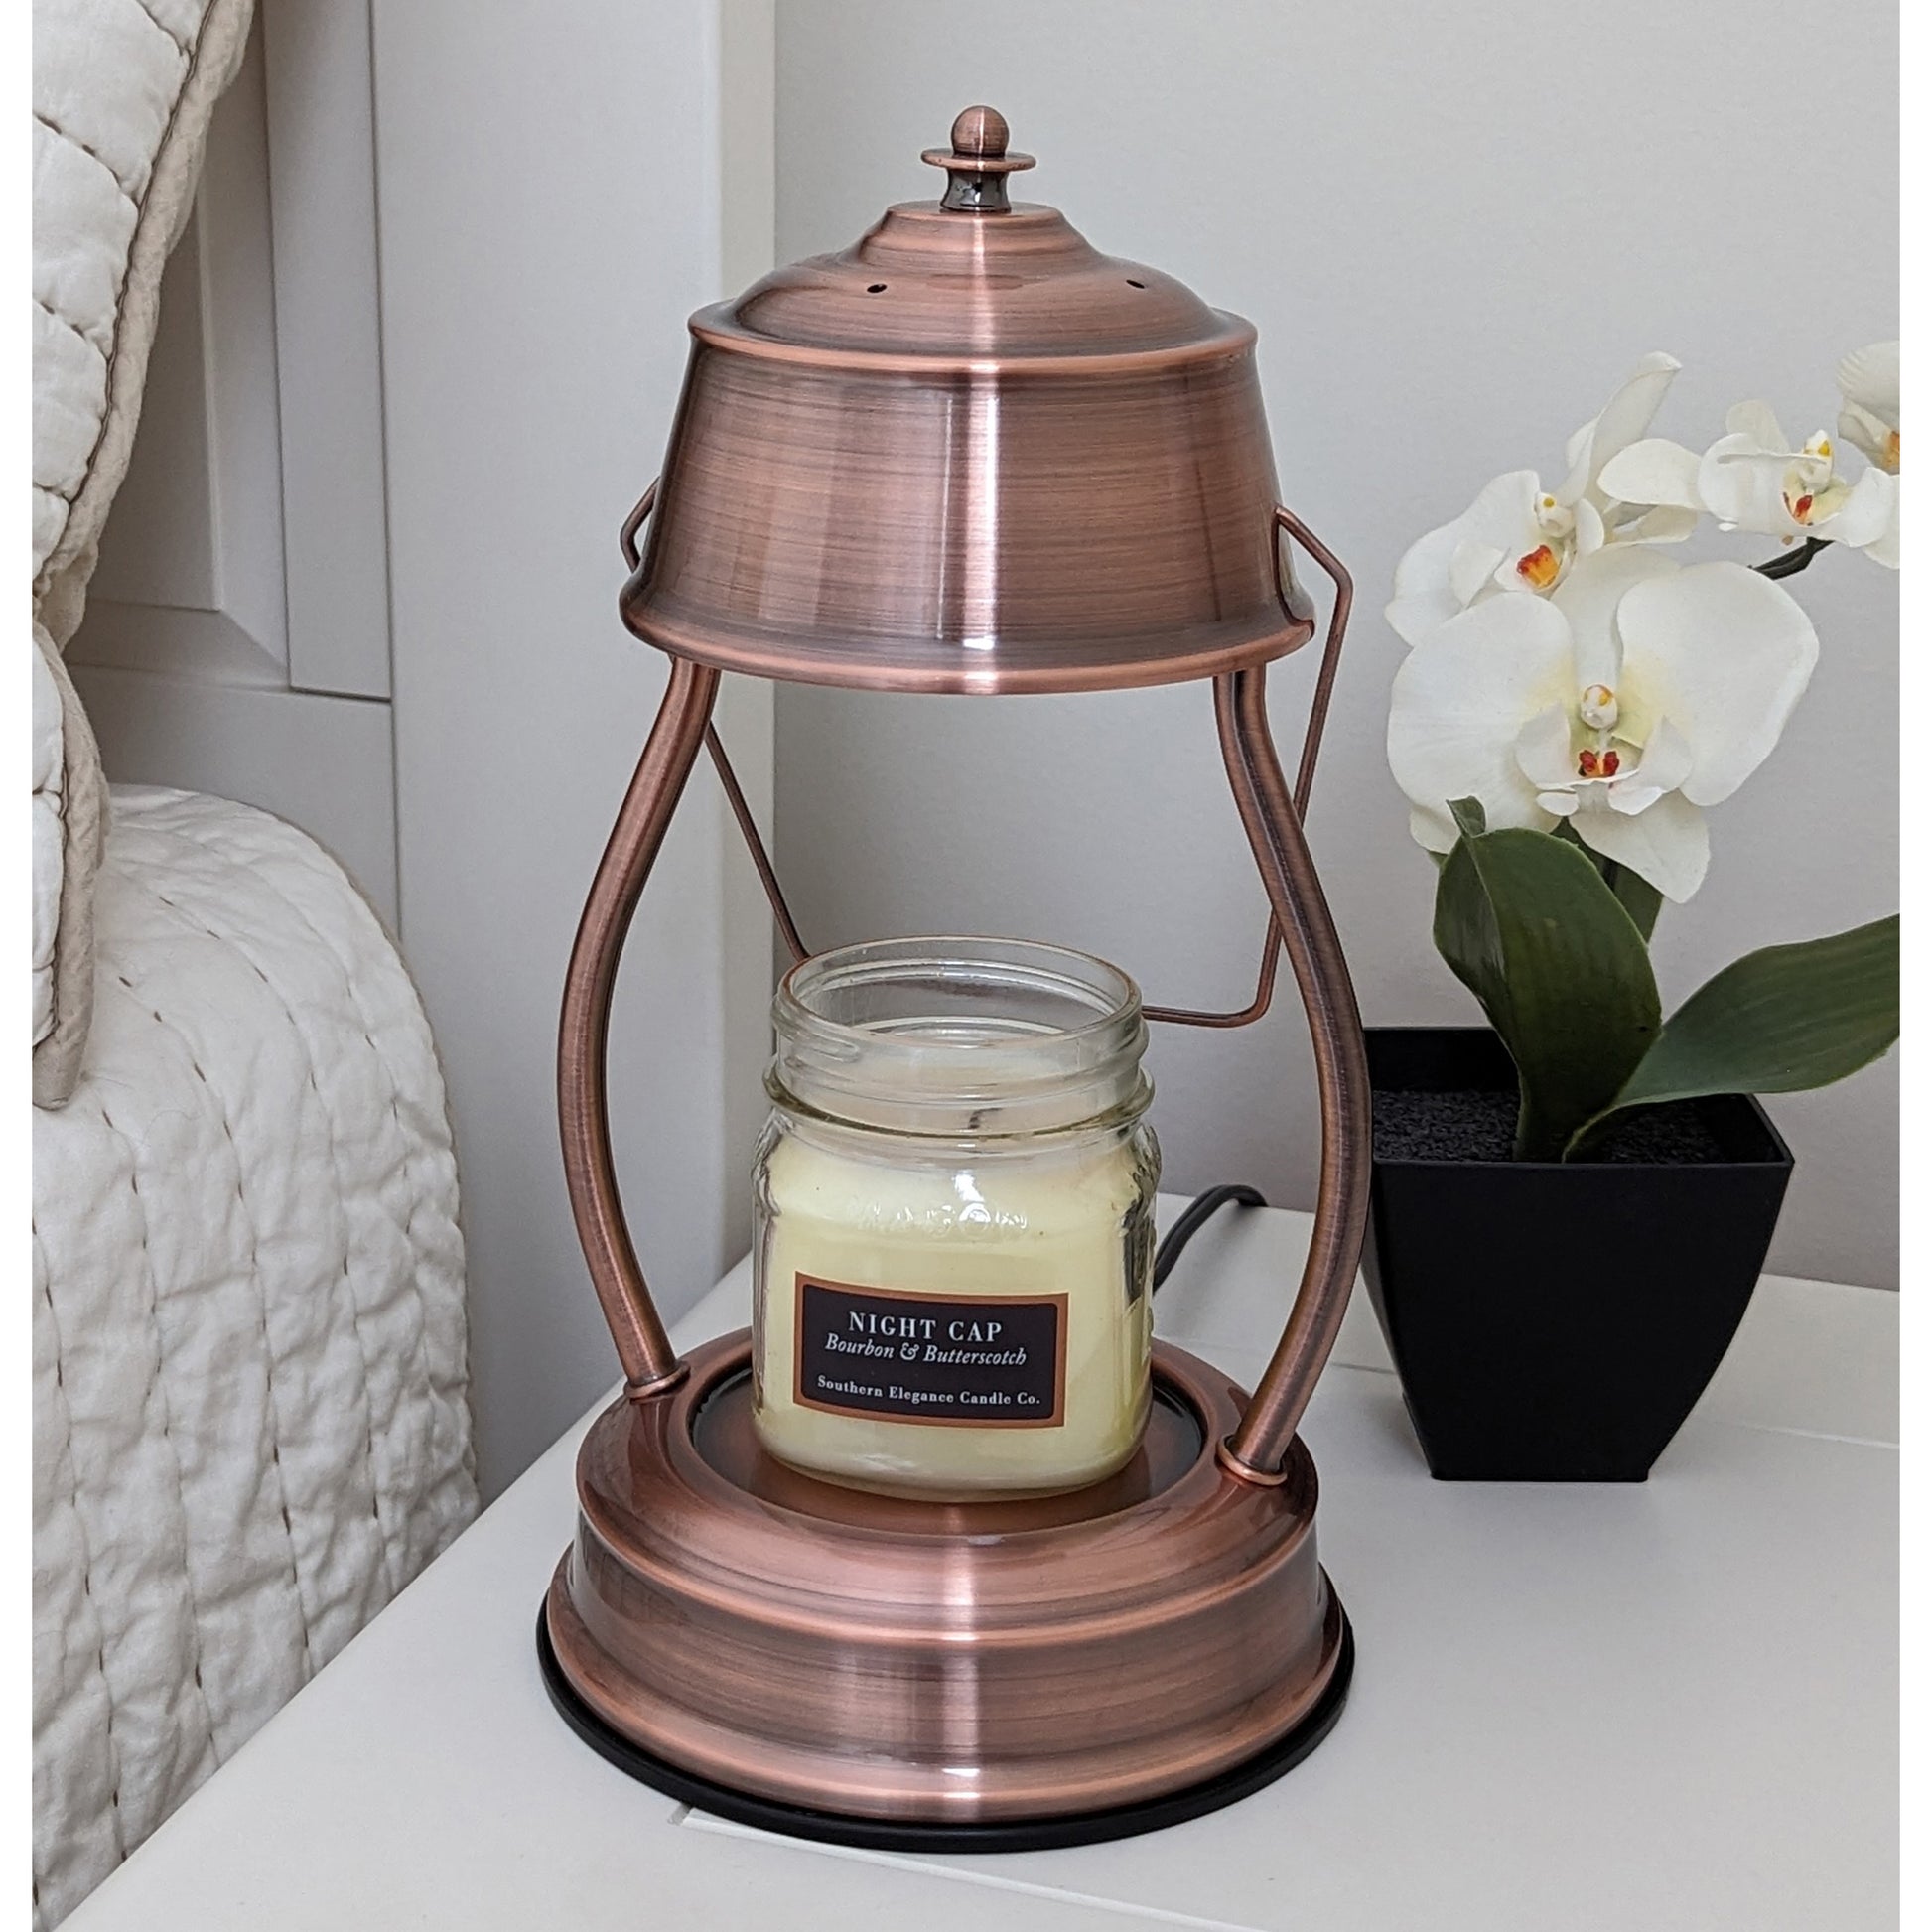 Image, unlit copper candle warmer on a bedside table with small scented candle.